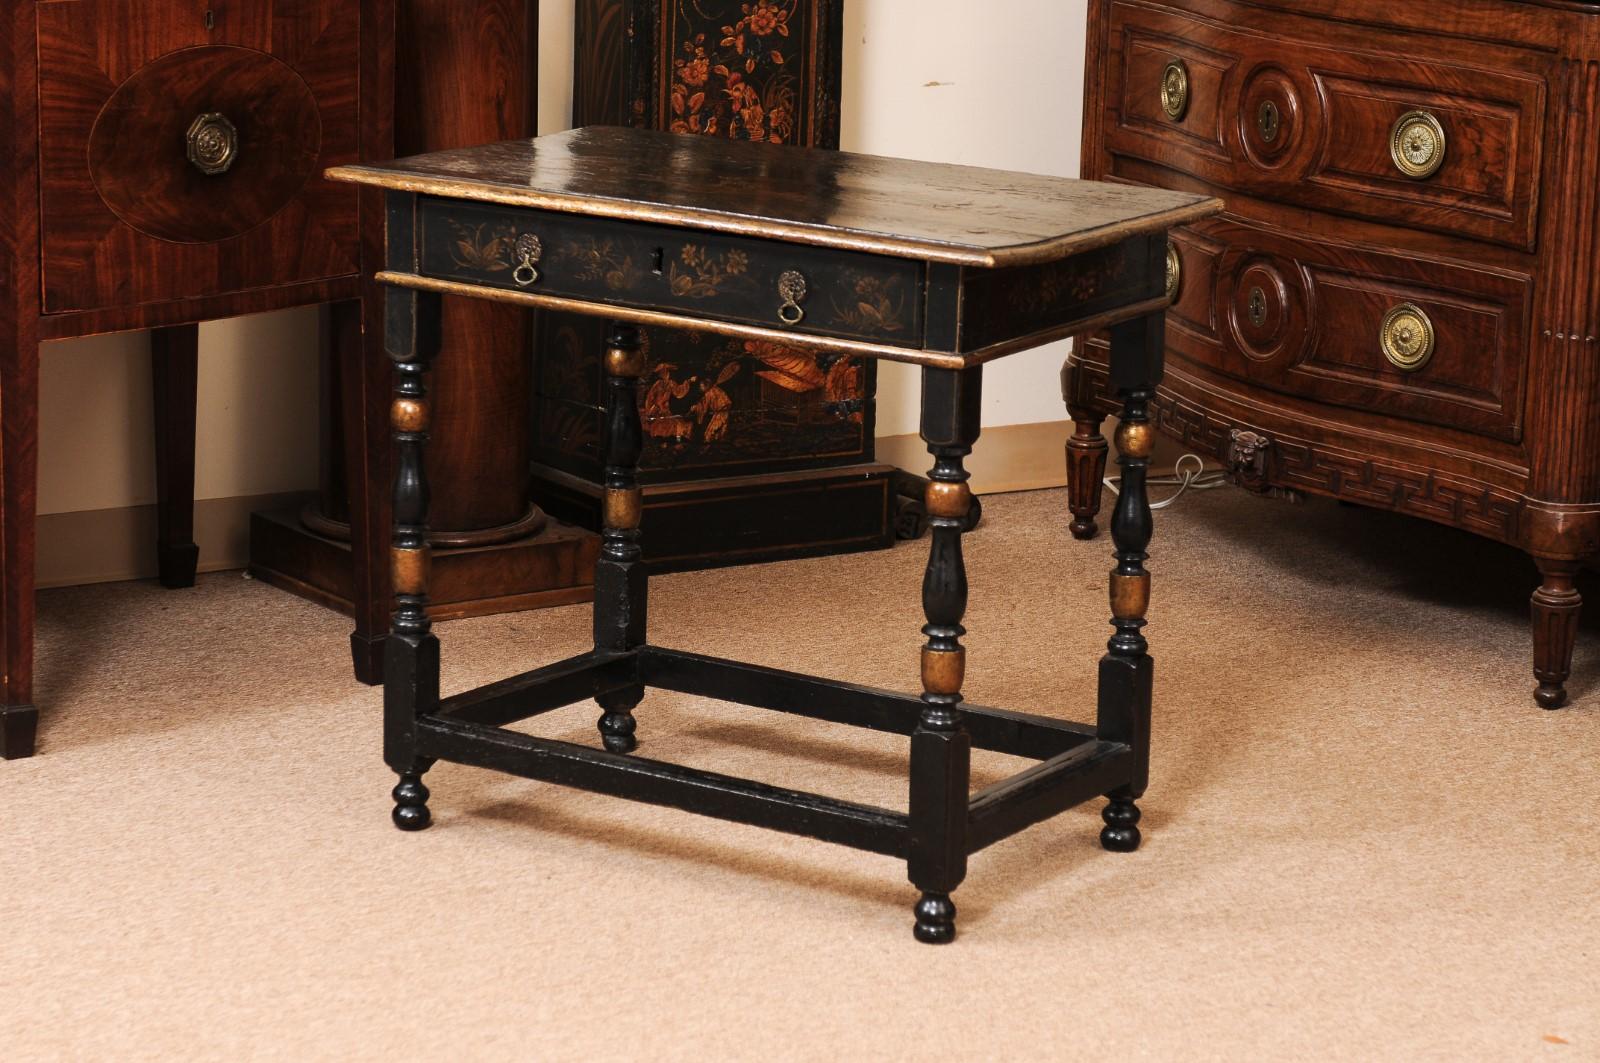 18th Century English Chinoiserie Decorated Side Table with Drawer, Turned Legs & For Sale 5